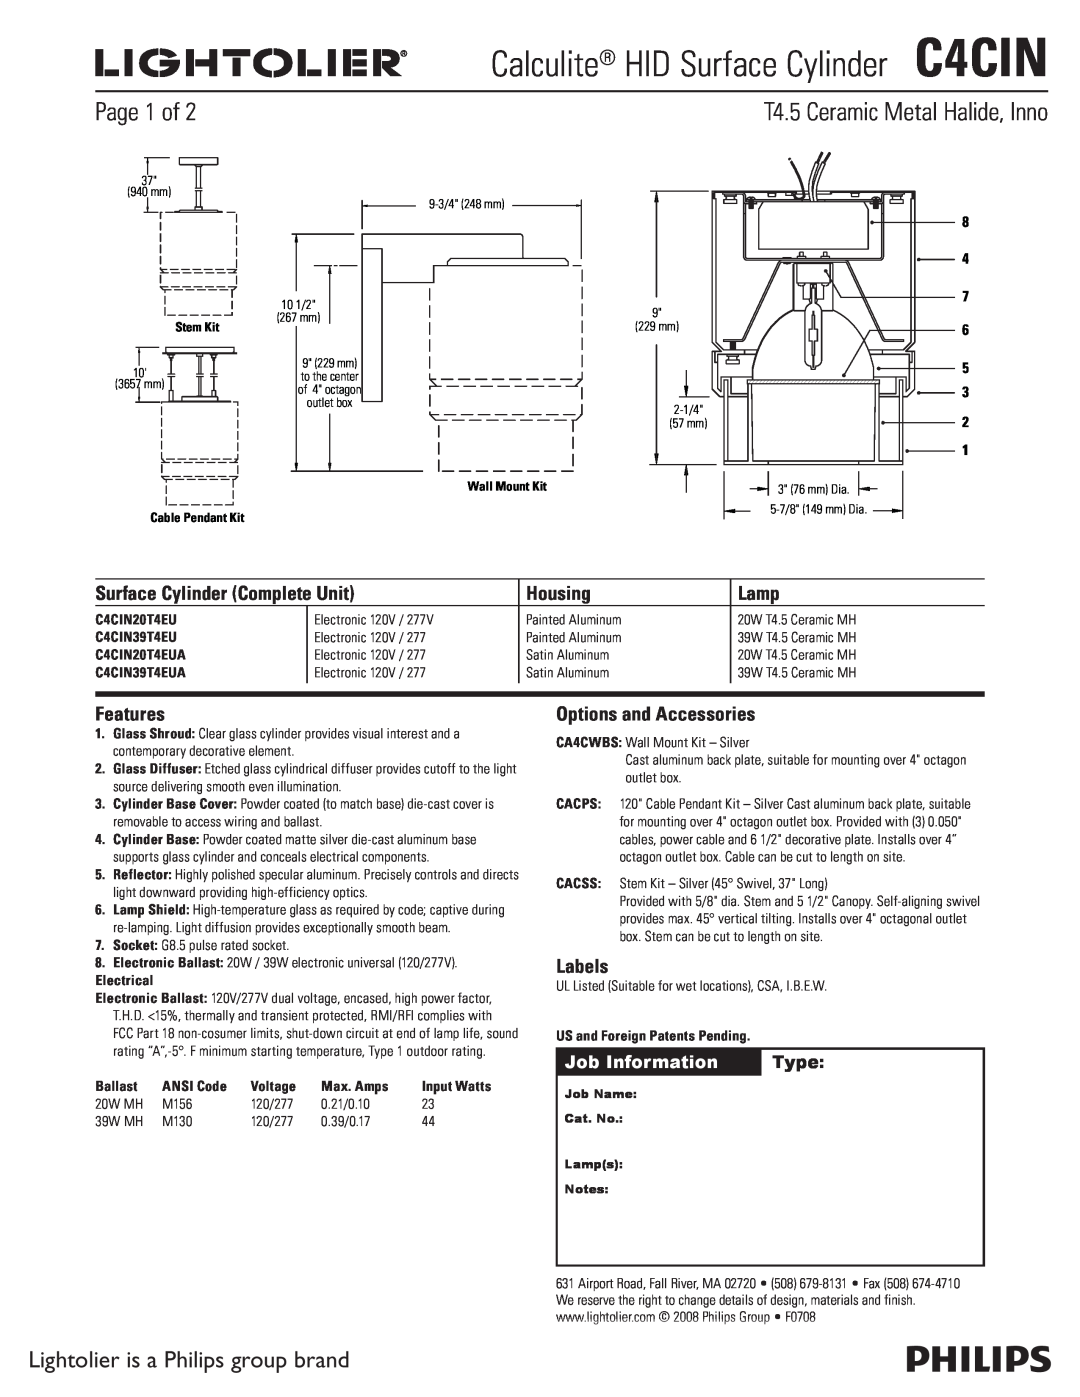 Lightolier C4CIN manual Page 1 of, Lightolier is a Philips group brand, Surface Cylinder Complete Unit, Housing, Lamp 